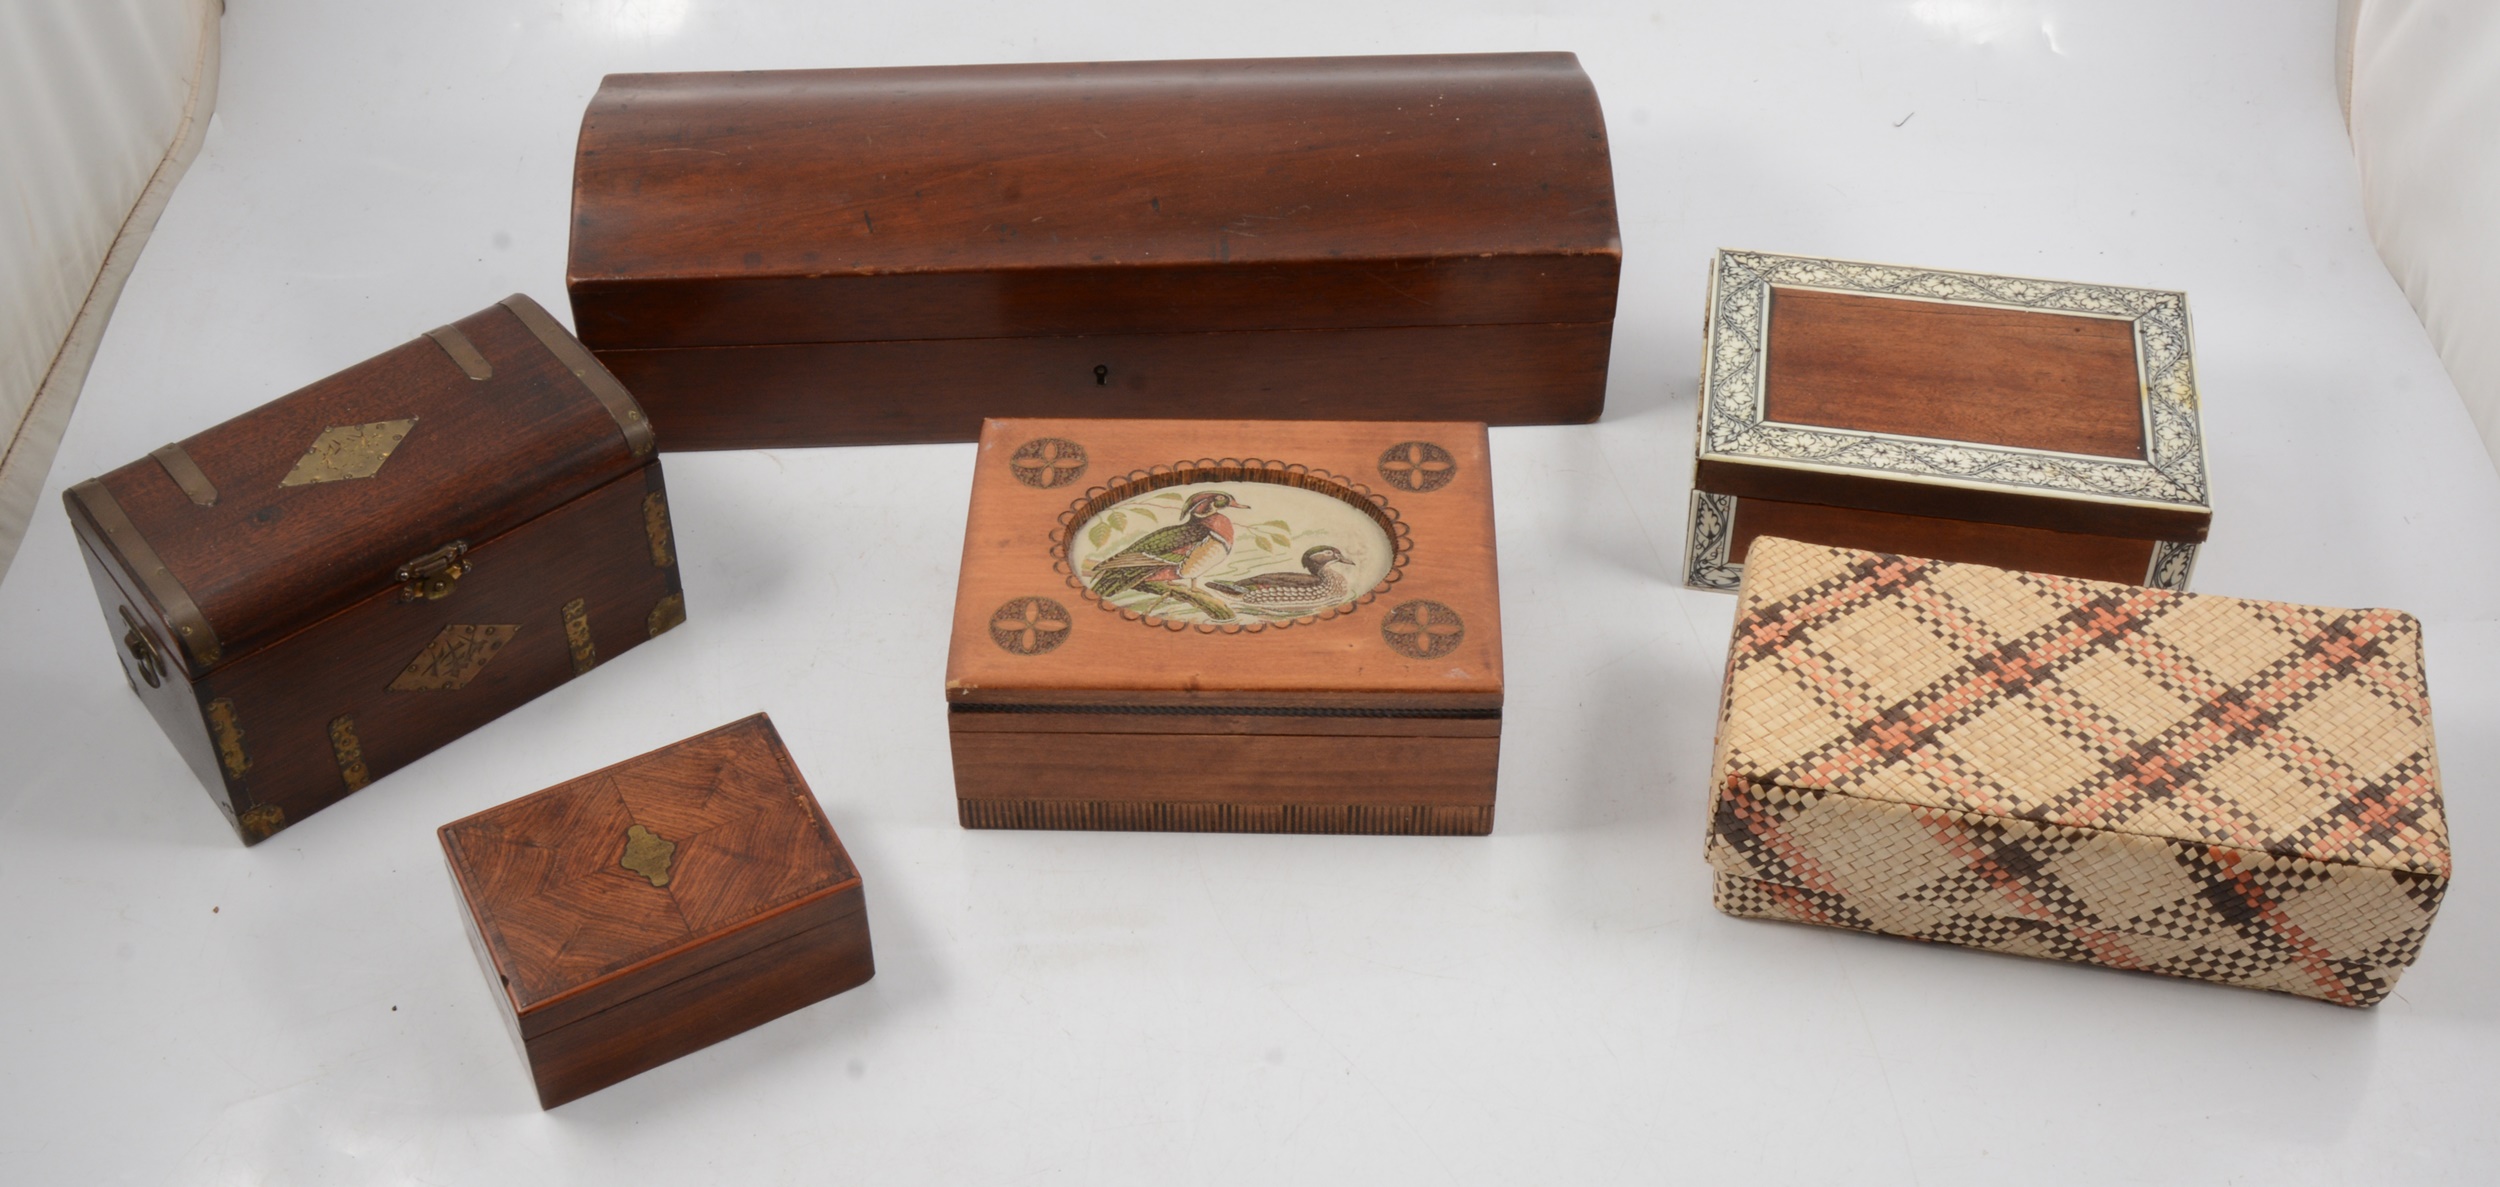 Mahogany tea caddy, and other cigar and gloves boxes,